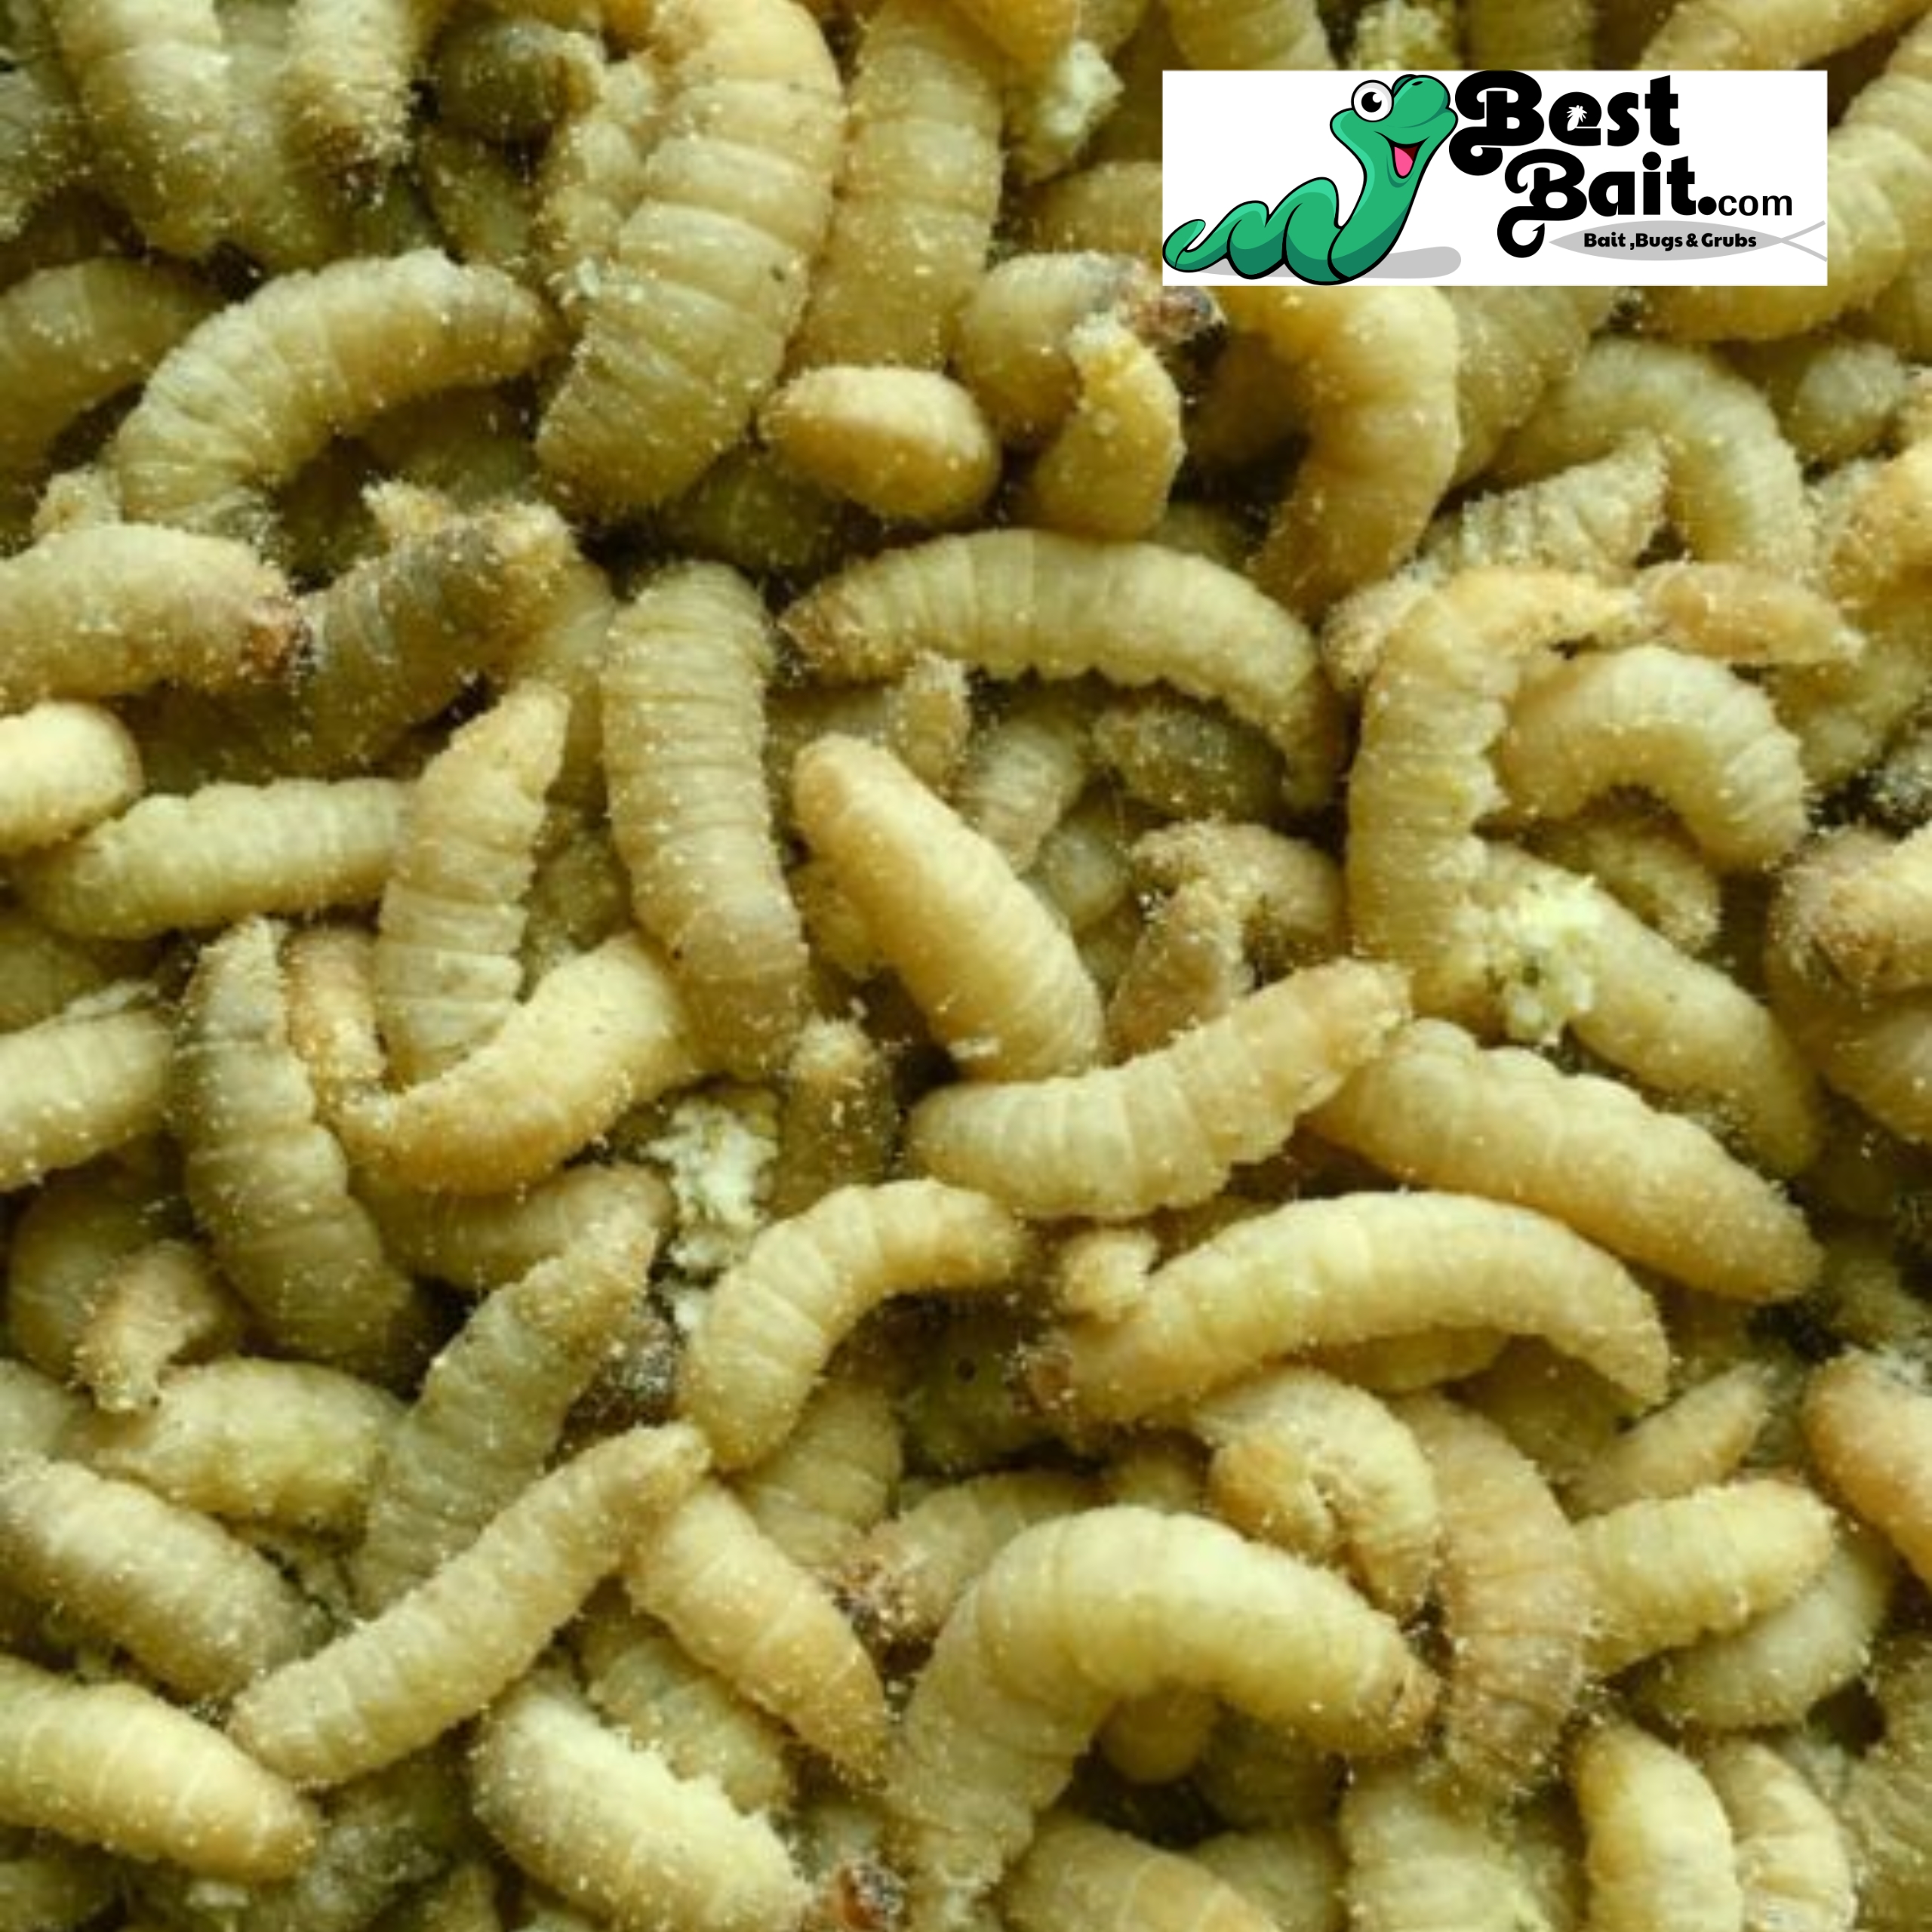  BESTBAIT 2 lbs. European Nightcrawlers Approx. 500-650 Count  Composting Worms Live Fishing Bait : Sports & Outdoors